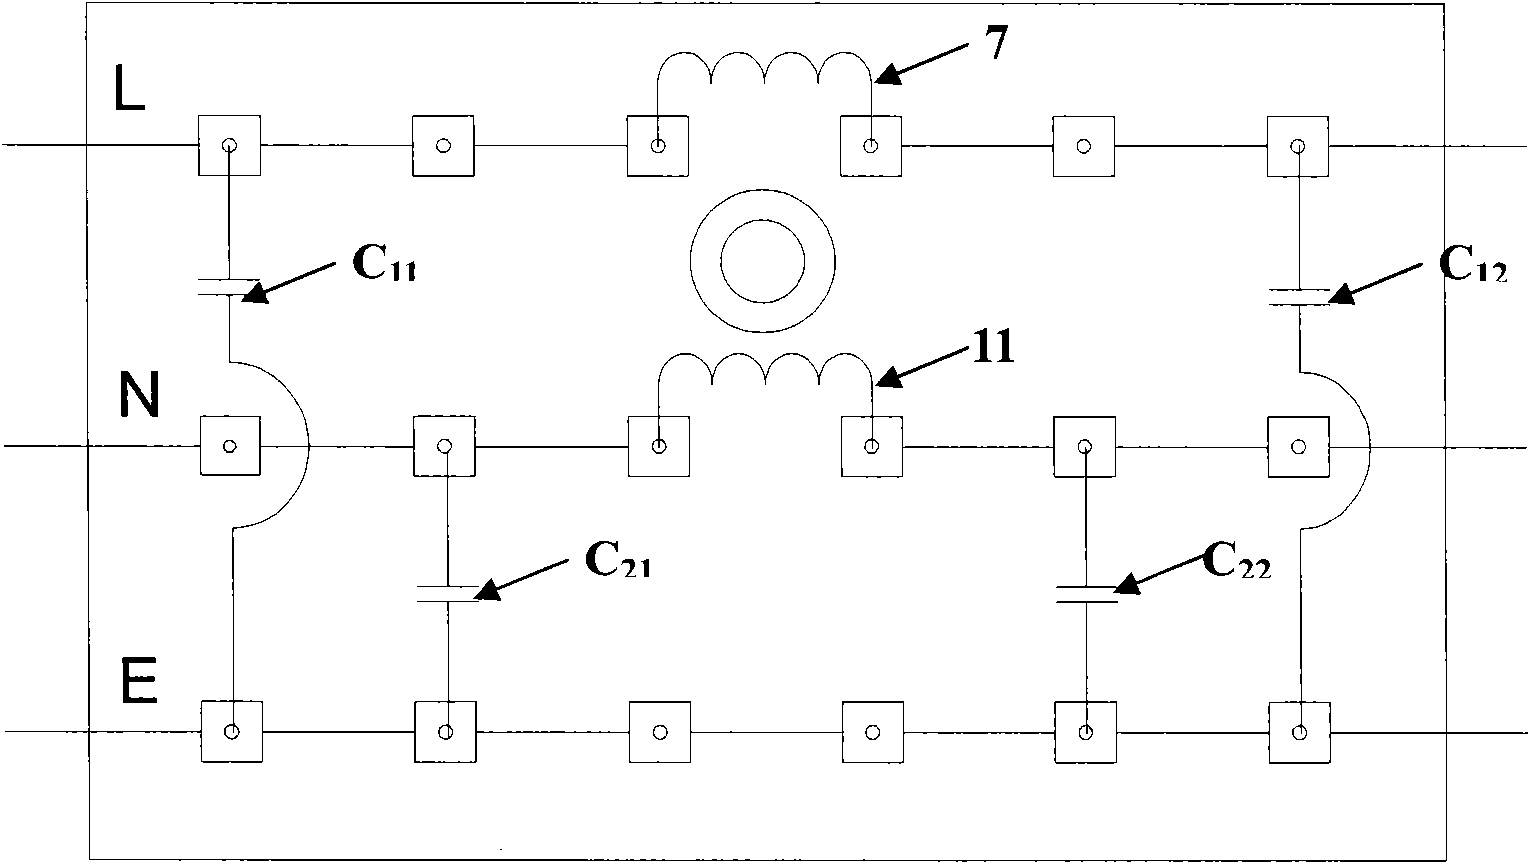 Common mode filter for inhibiting conducted electromagnetic interference